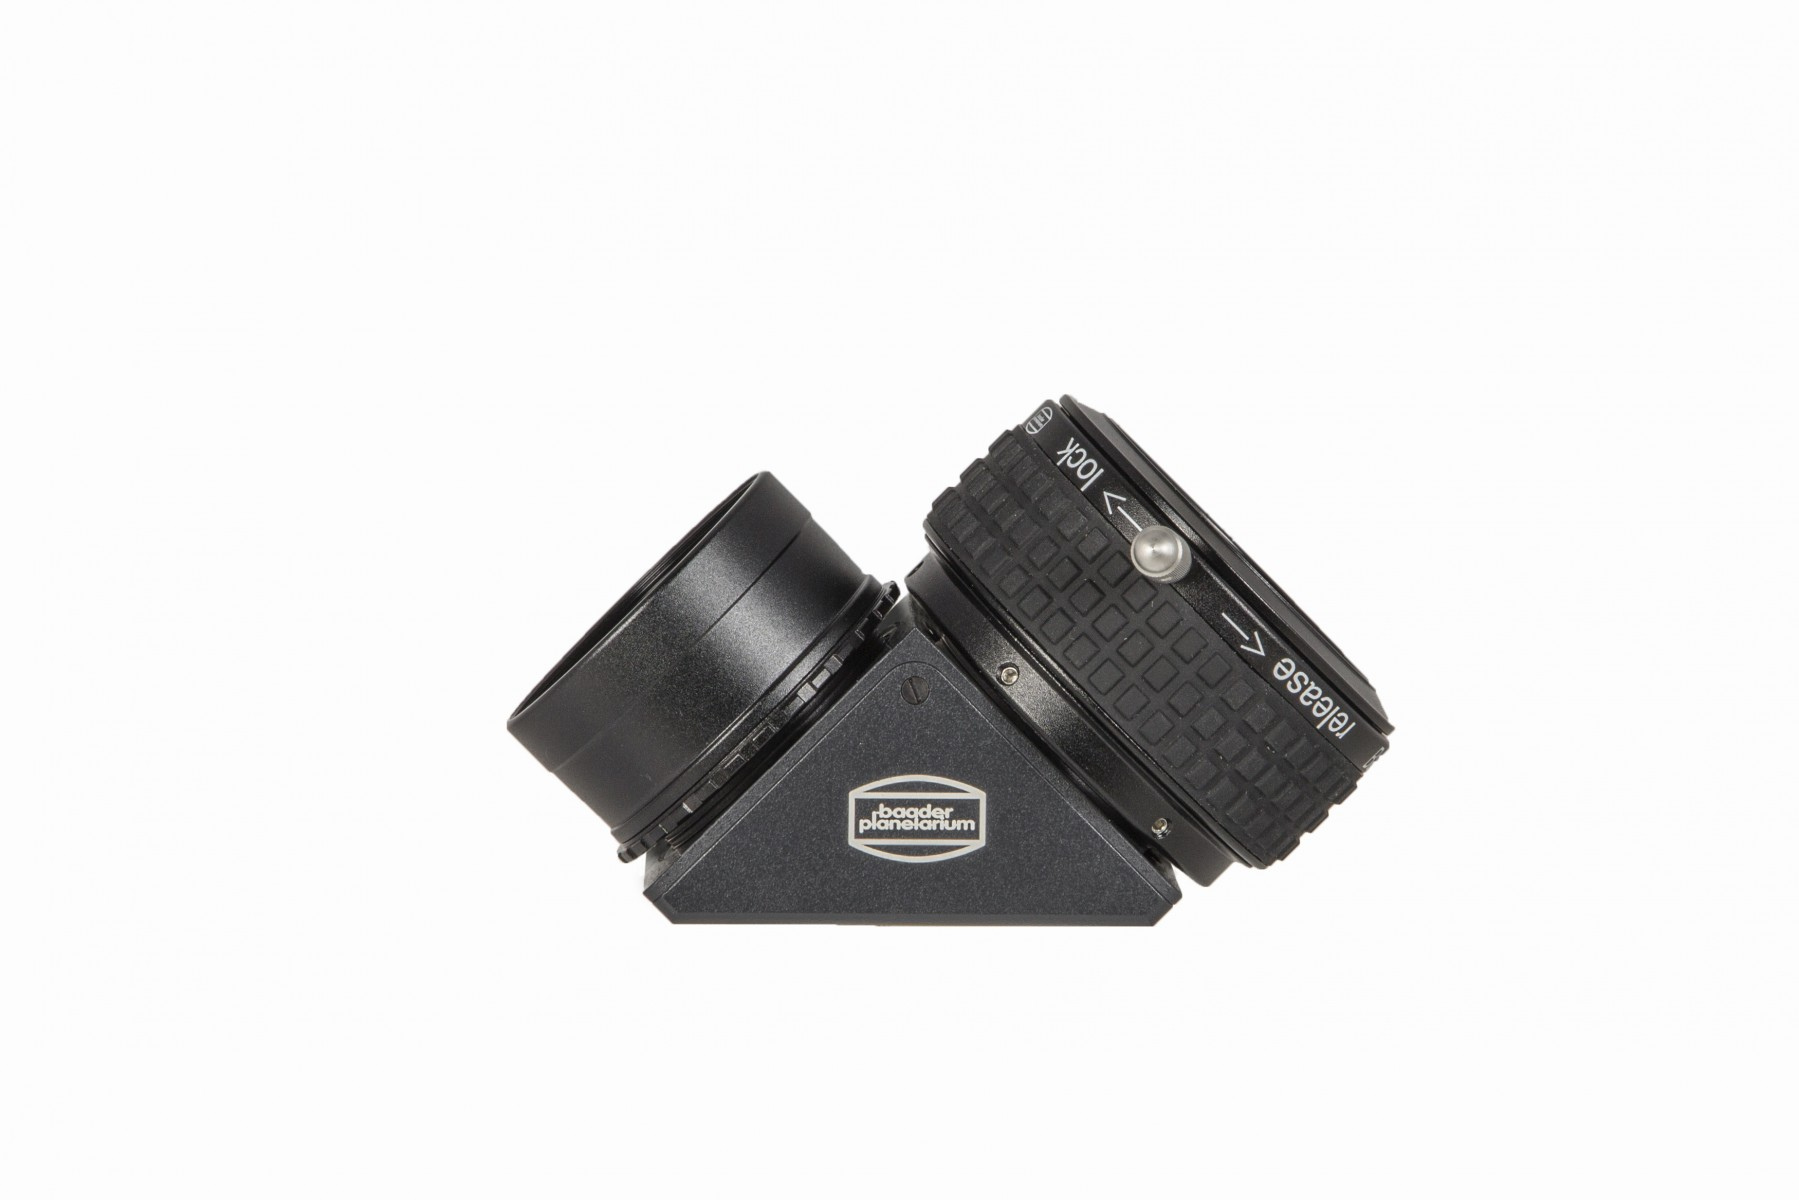 baader-t-2-stardiagonal-zeiss-prism-with-bbhs-coating-t-2-part-01b-59f.jpg